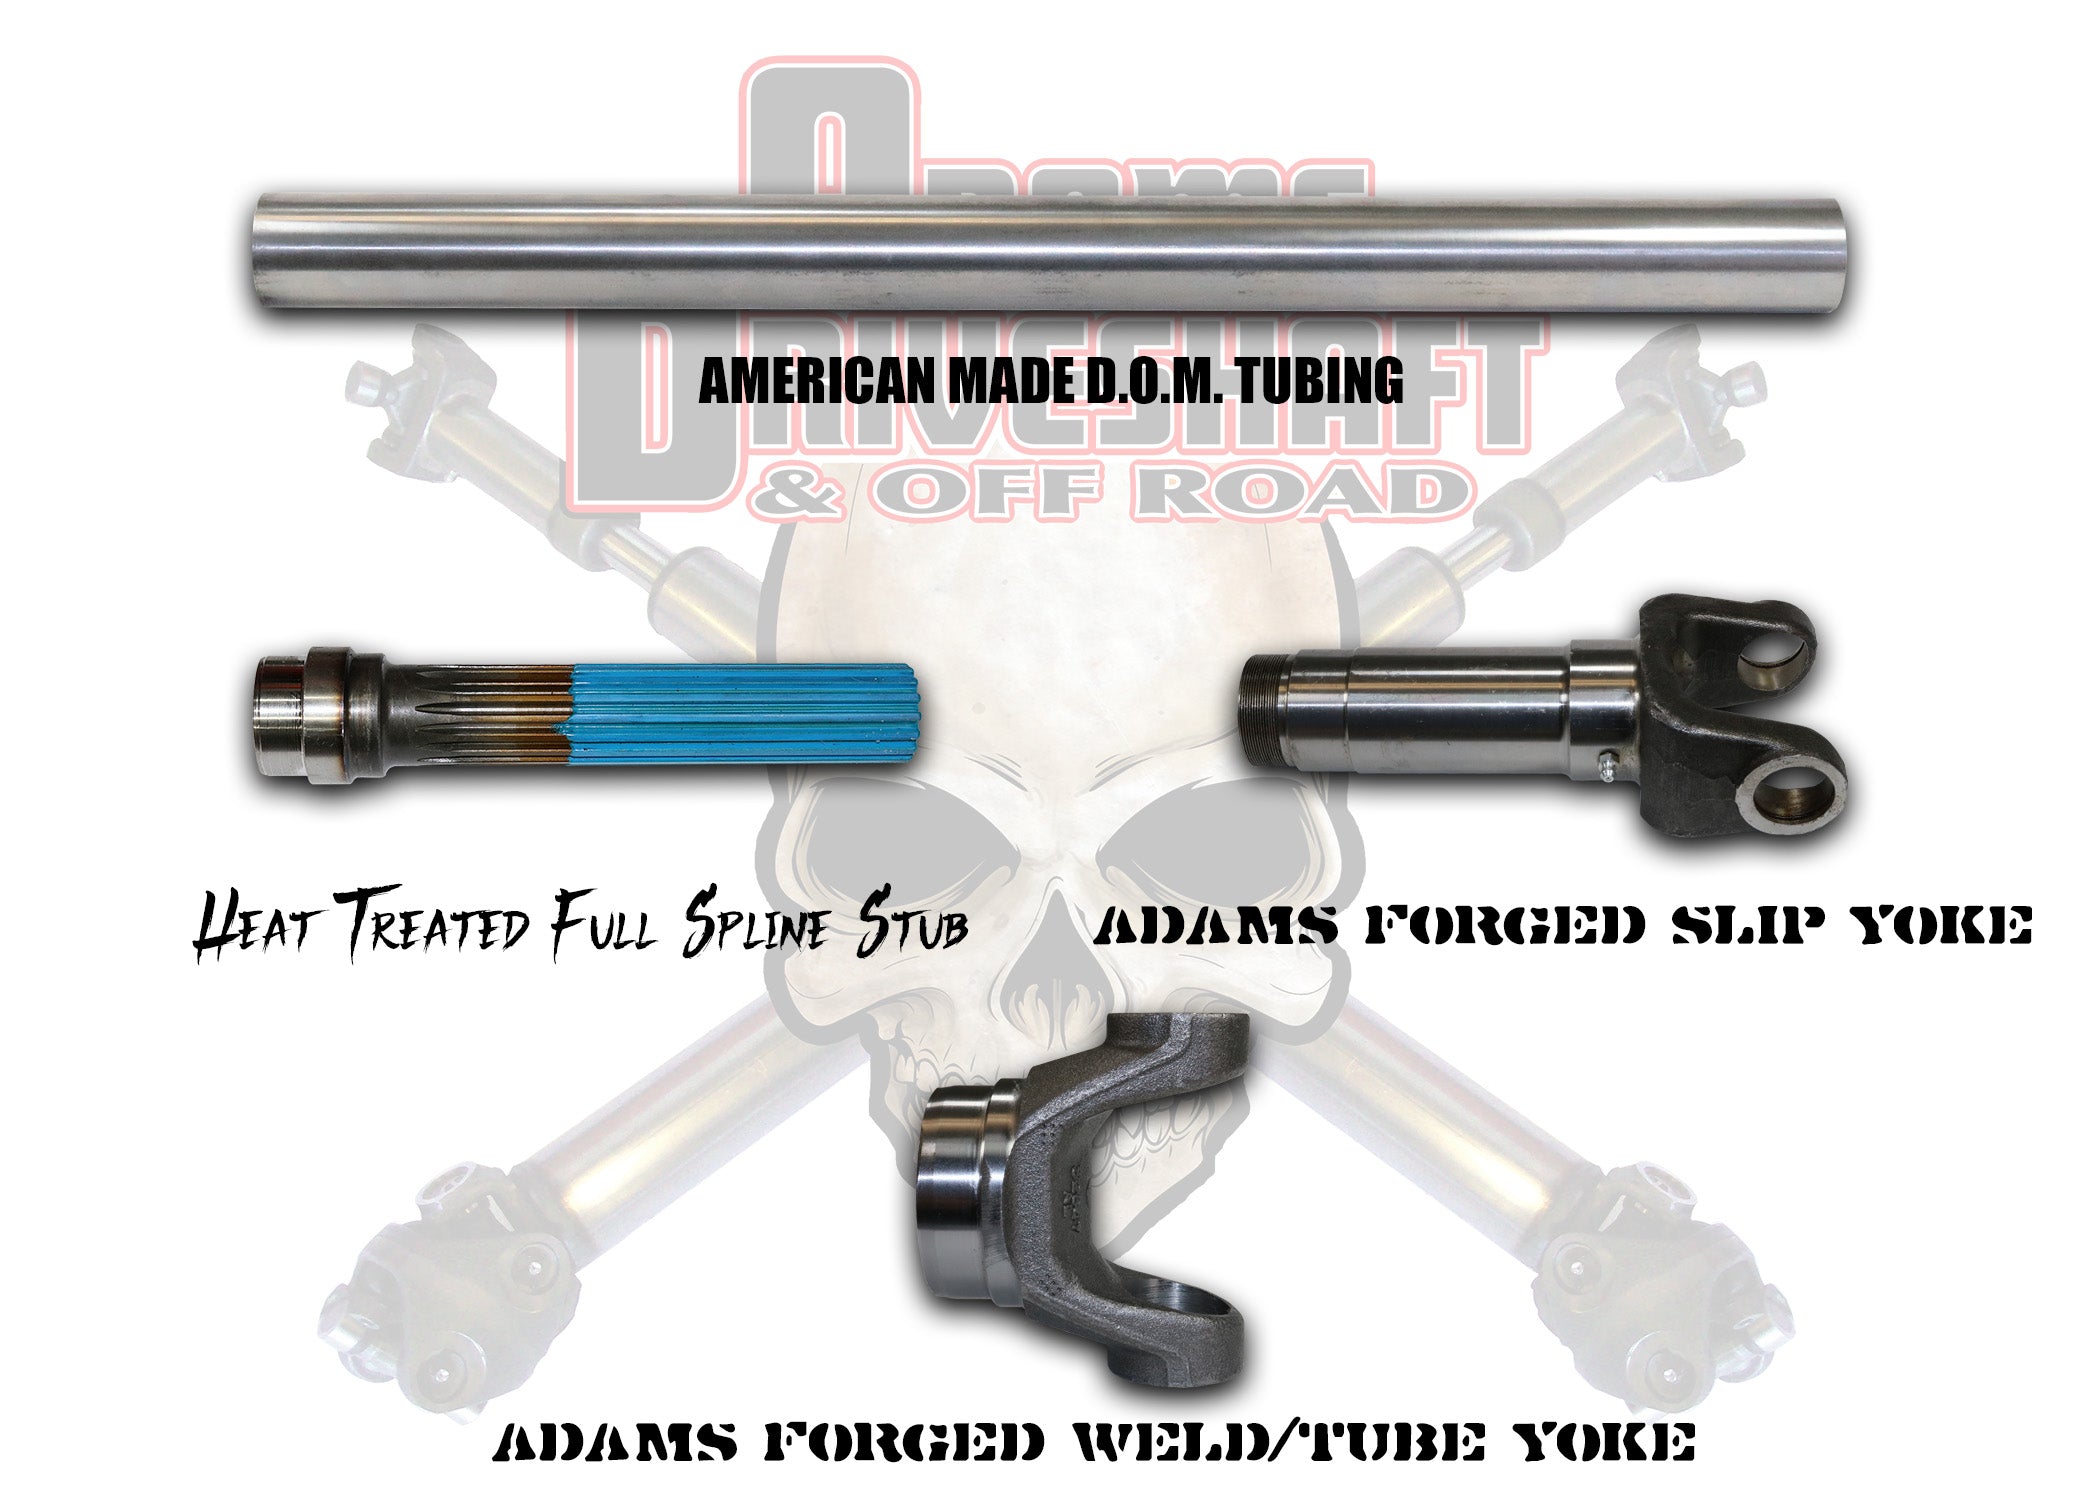 Adams Driveshaft's Build your Own - DIY - Offroad Buggy, Jeep Driveshaft, Etc. in 1350 Series - 0